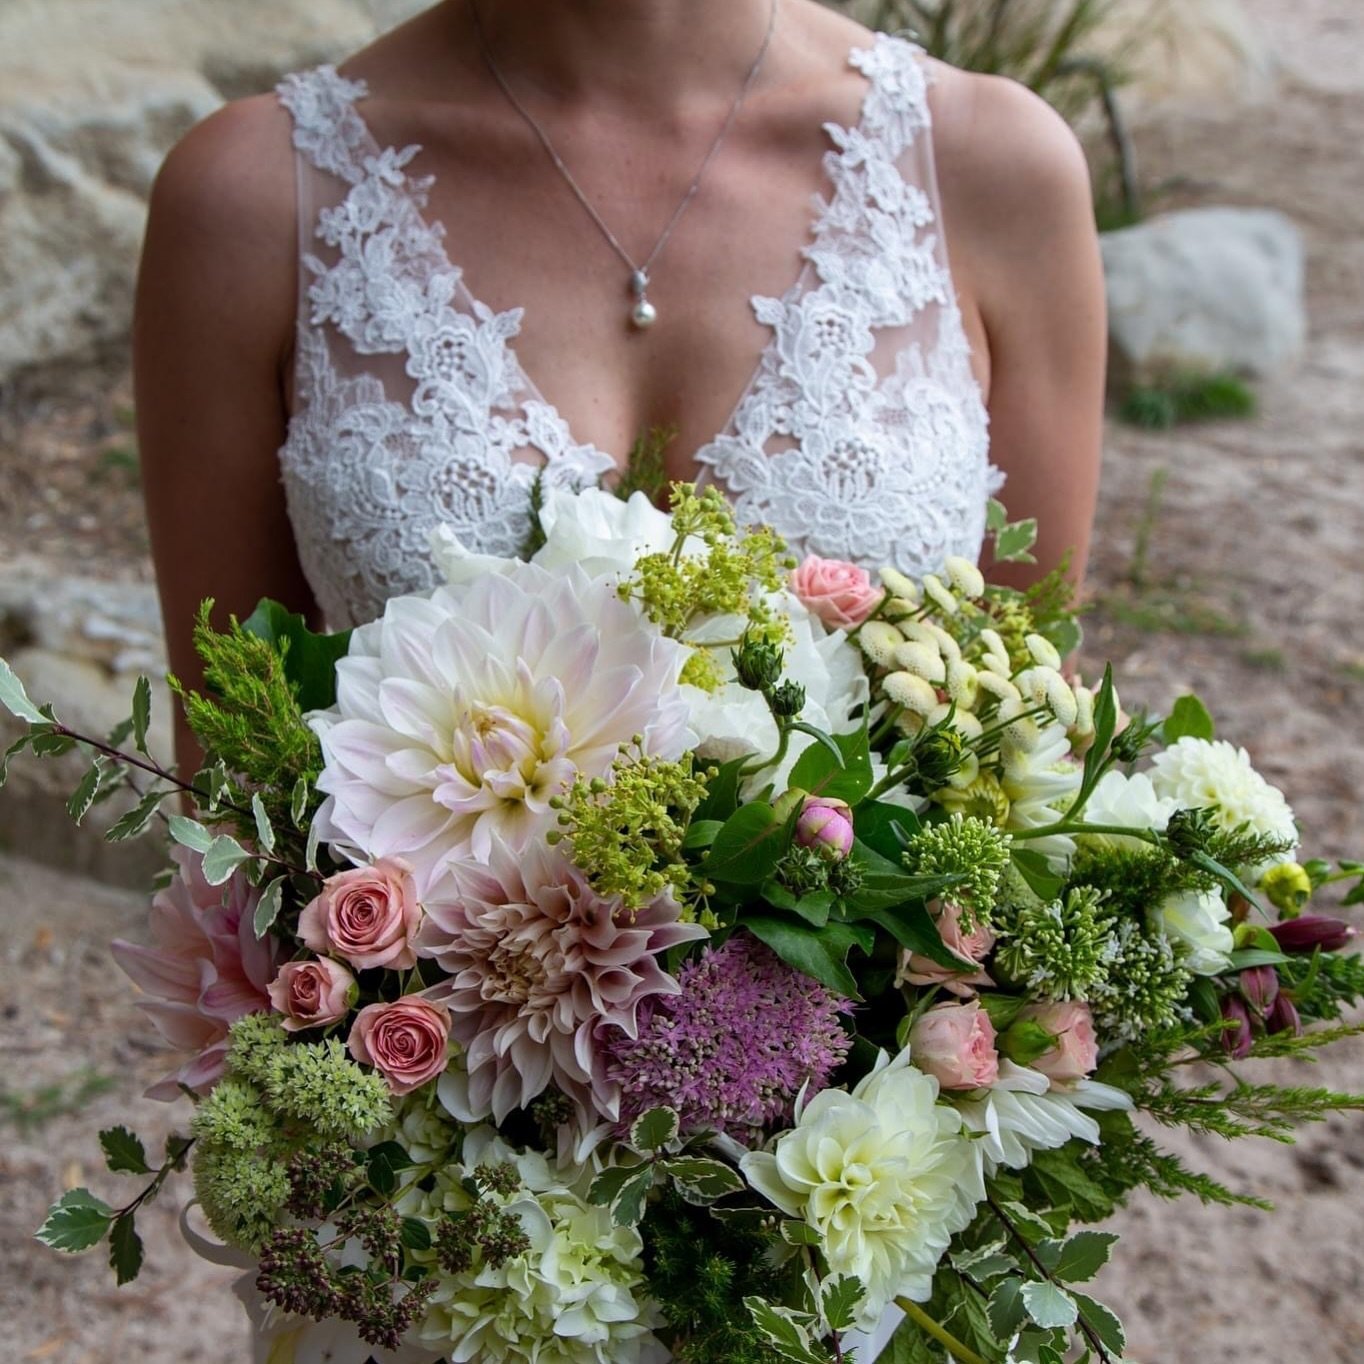 We provide the best bridal bouquet for your elopement, with our local vendor lists. This gorgeous one from @wildflowerscoromandel 🌺🌺🌺
We want your experience to exceed your expectations! Get in touch to find out how. 🌺🌺🌺
www.coromandelelopement